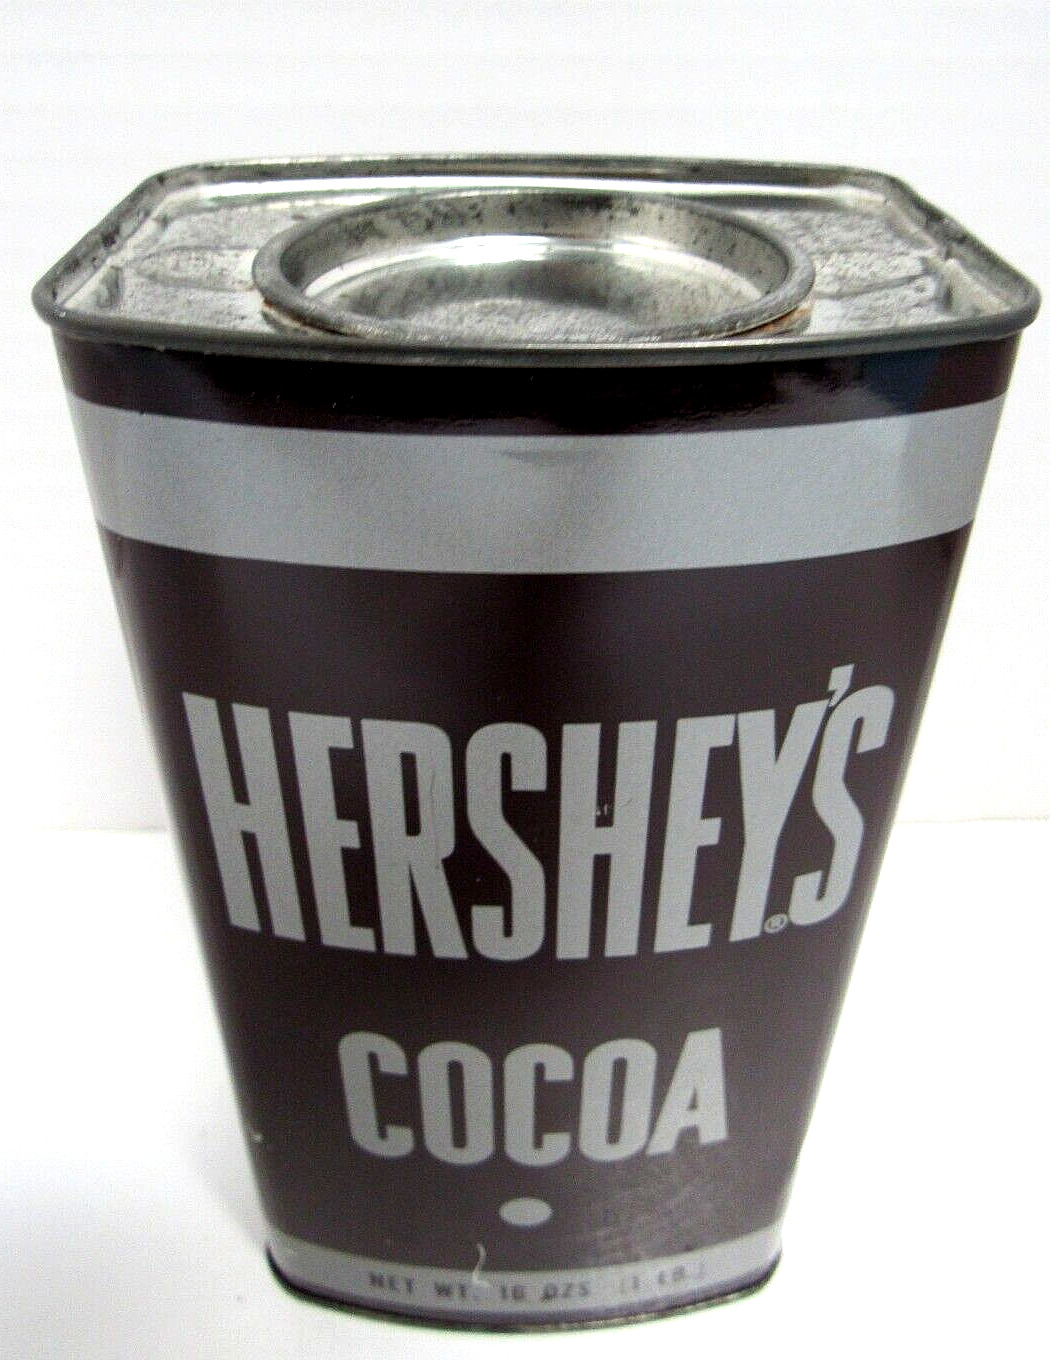 VINTAGE 1960\'s HERSHEY\'S COCOA 16 0Z. (1 lb.) TIN - INCLUDES 3 RECIPES